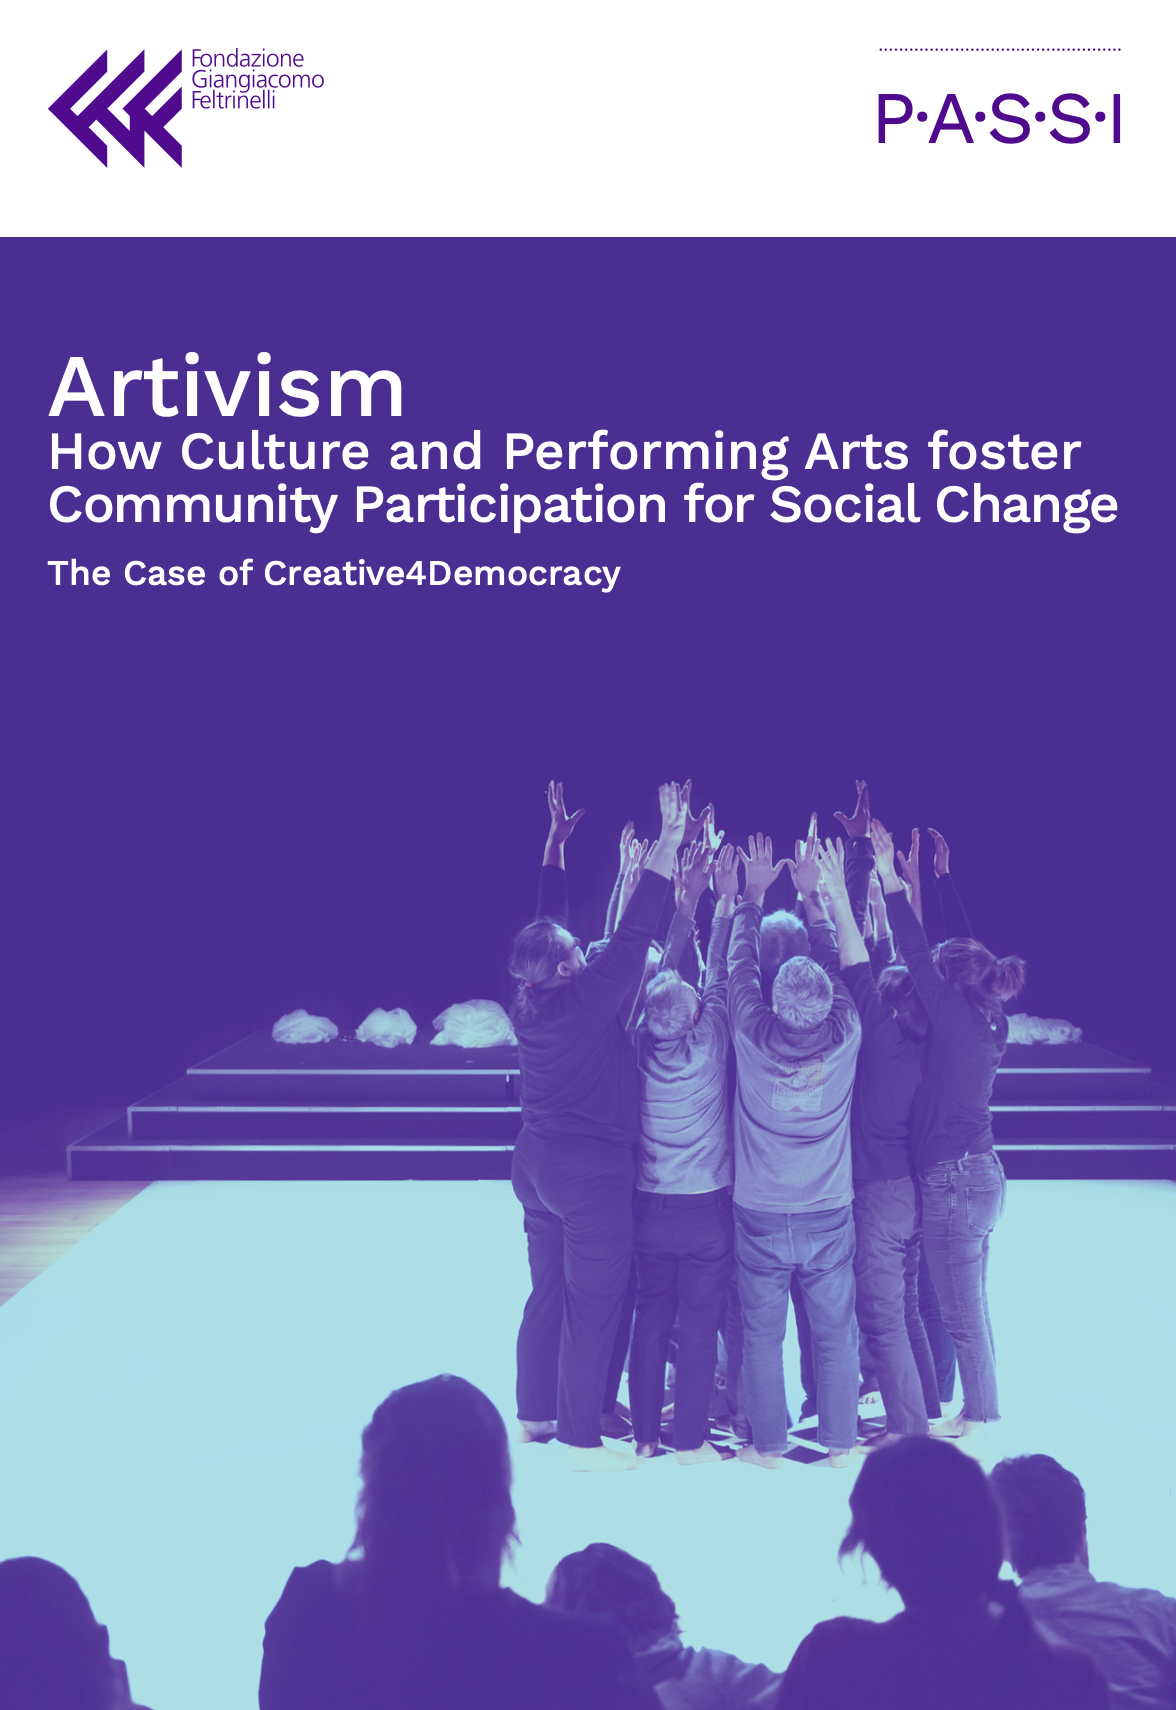 Artivism
How Culture and Performing Arts foster Community Participation for Social Change
The Case of Creative4Democracy
